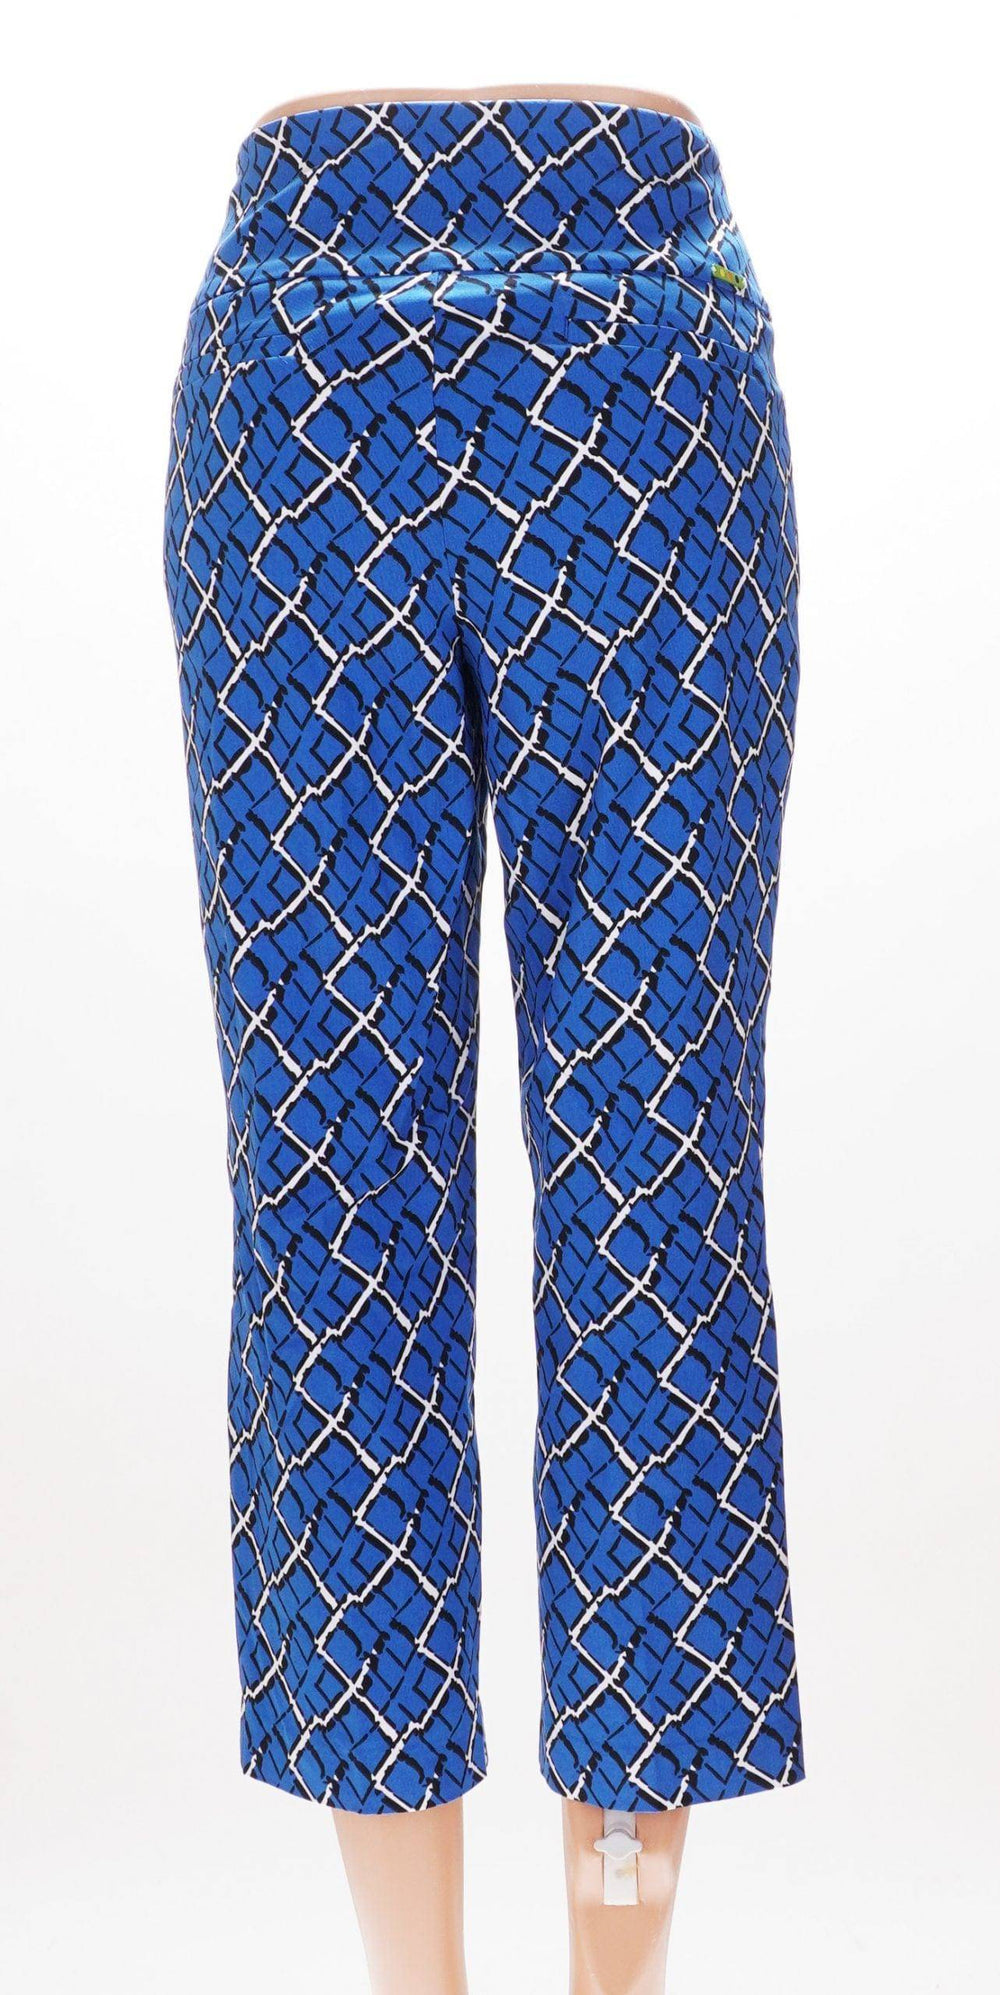 Swing Control Swing Control Cropped Pants - Turkish Sea Squares - Size 6